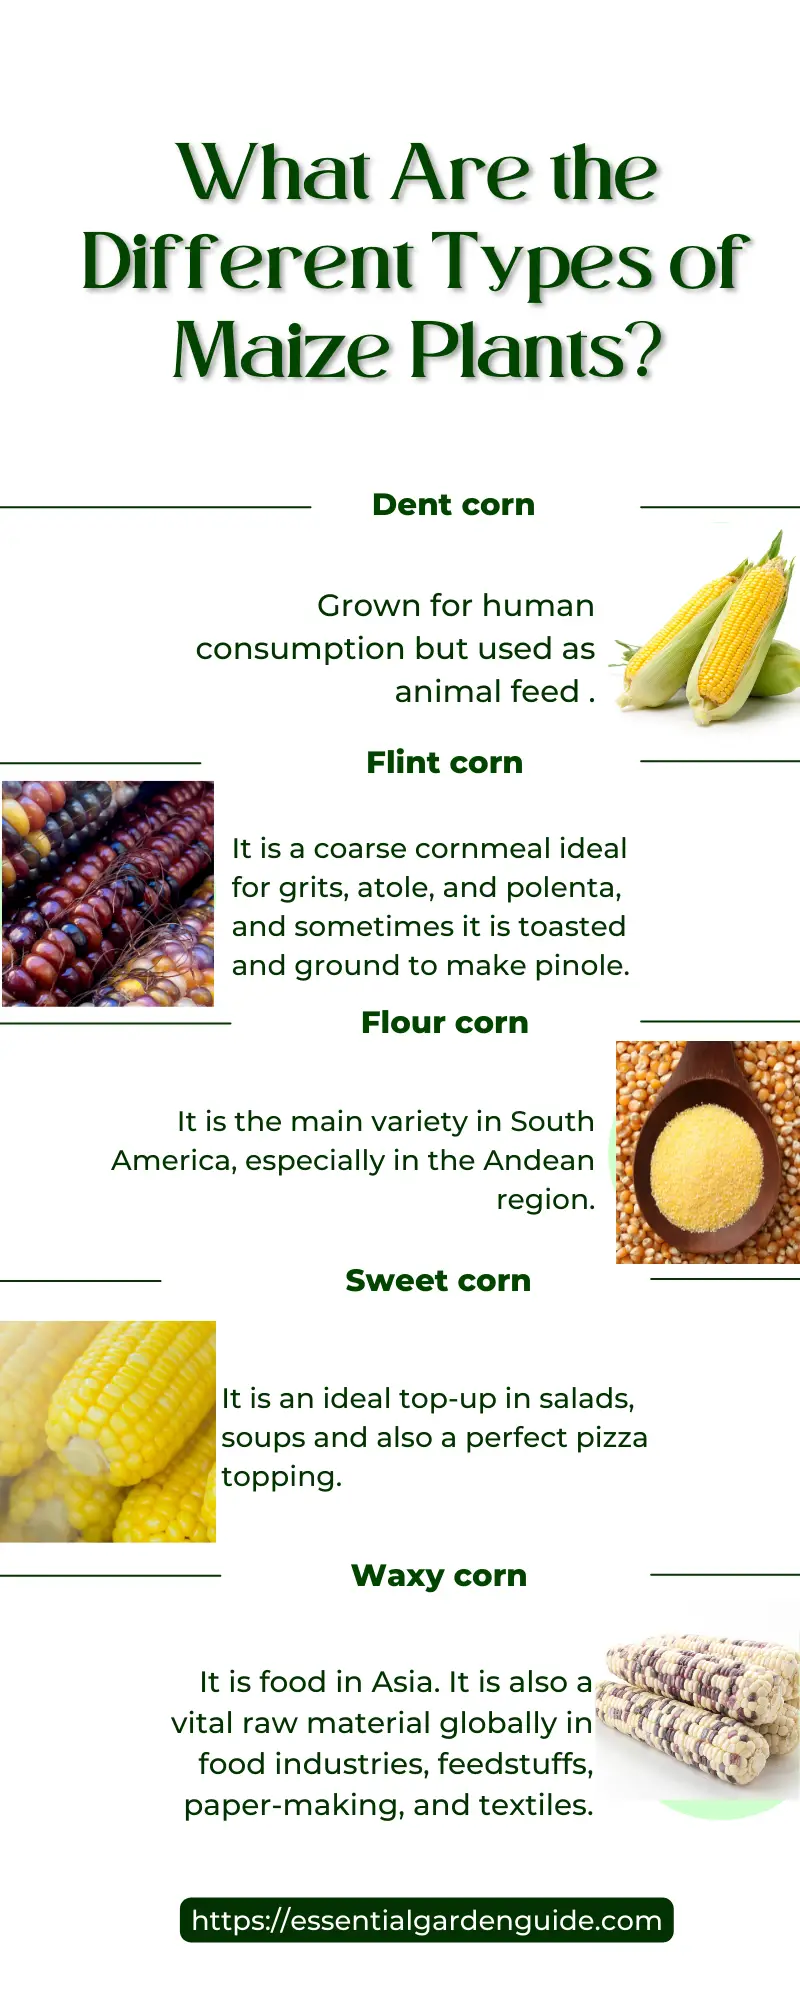 Name some varieties of the maize plant